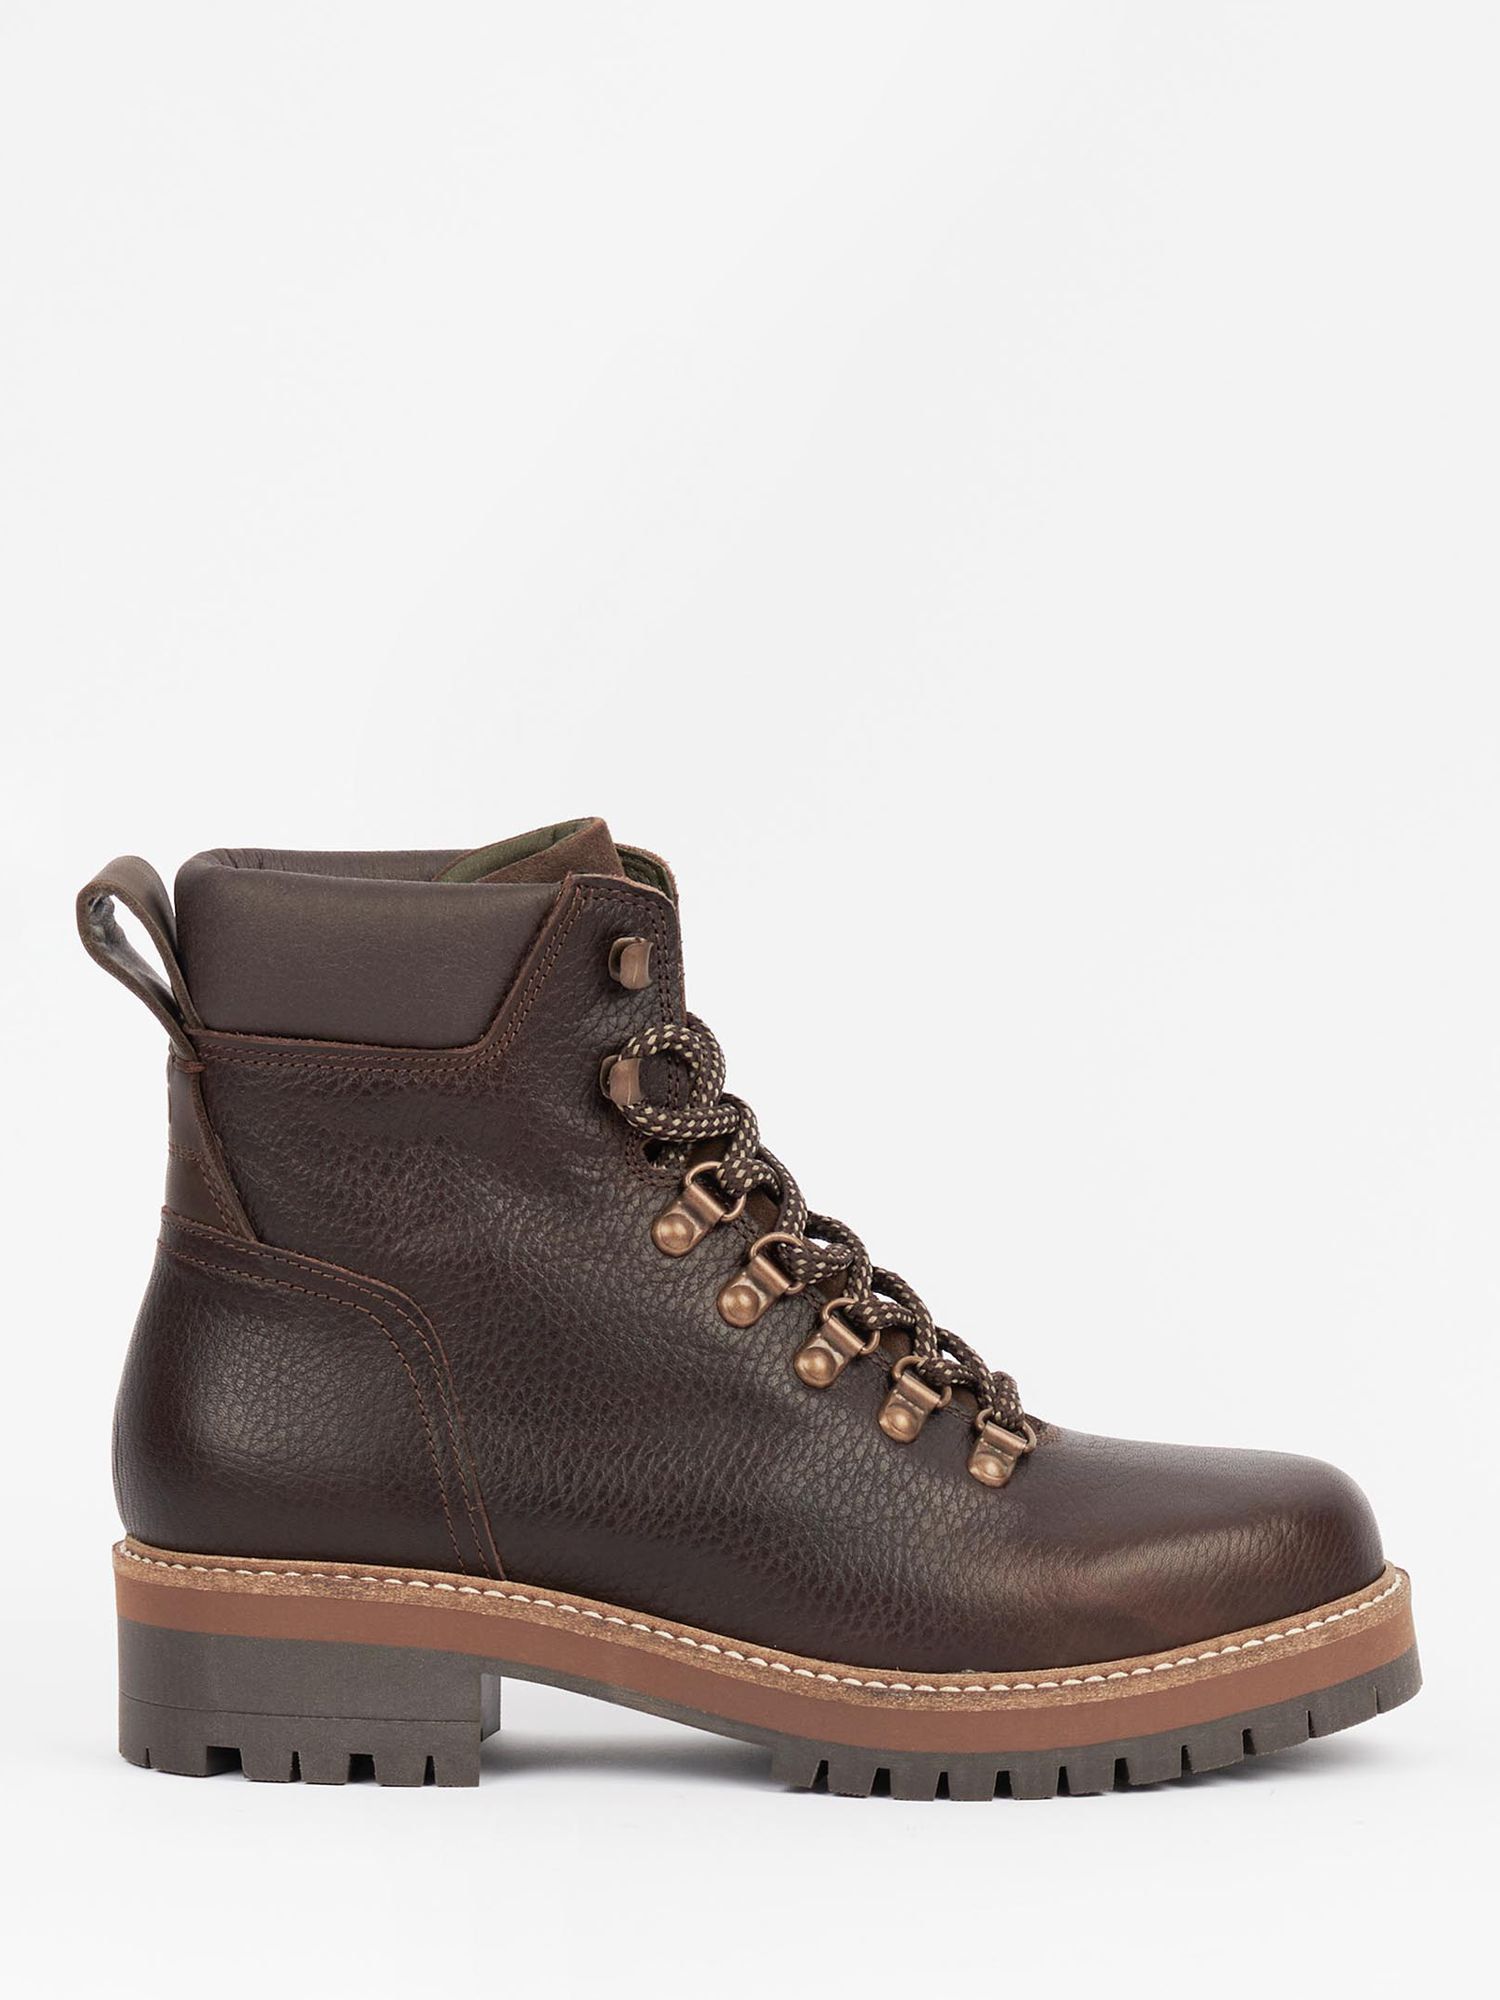 Barbour Stanton Leather Lace Up Ankle Boots, Dark Brown at John Lewis ...